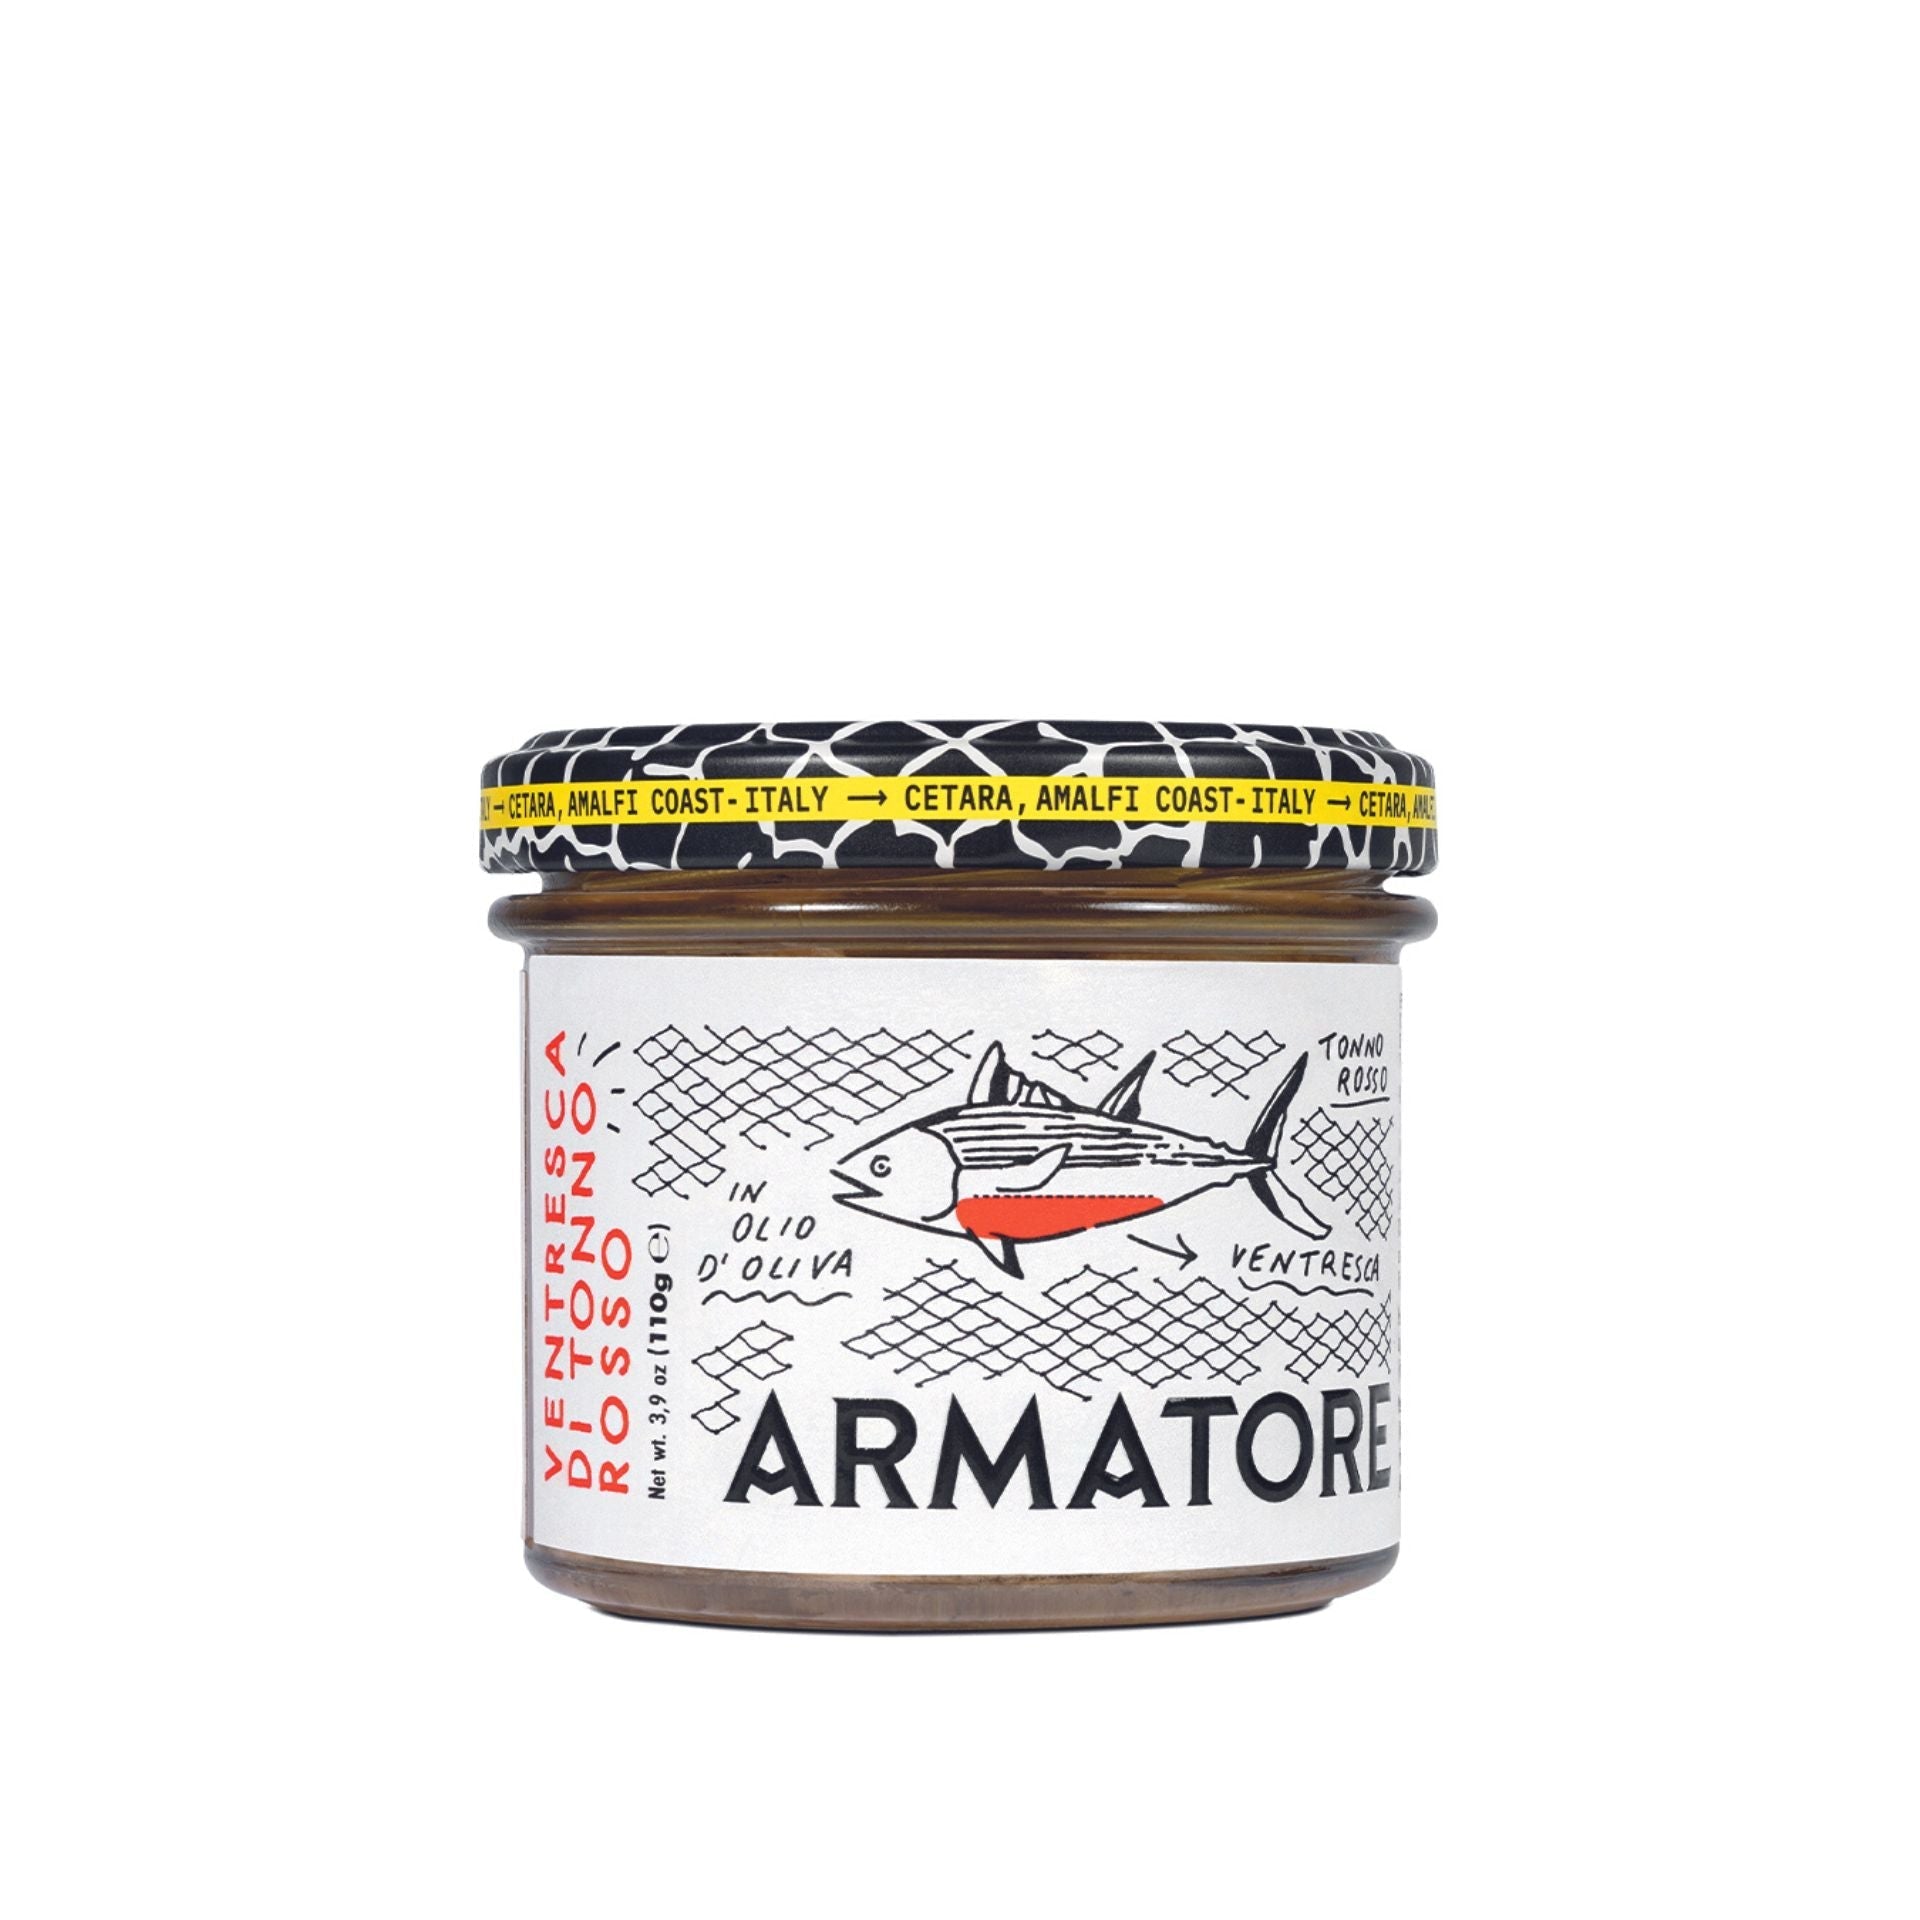 Armatore Bluefin Tuna Belly in Olive Oil 110g  | Imported and distributed in the UK by Just Gourmet Foods